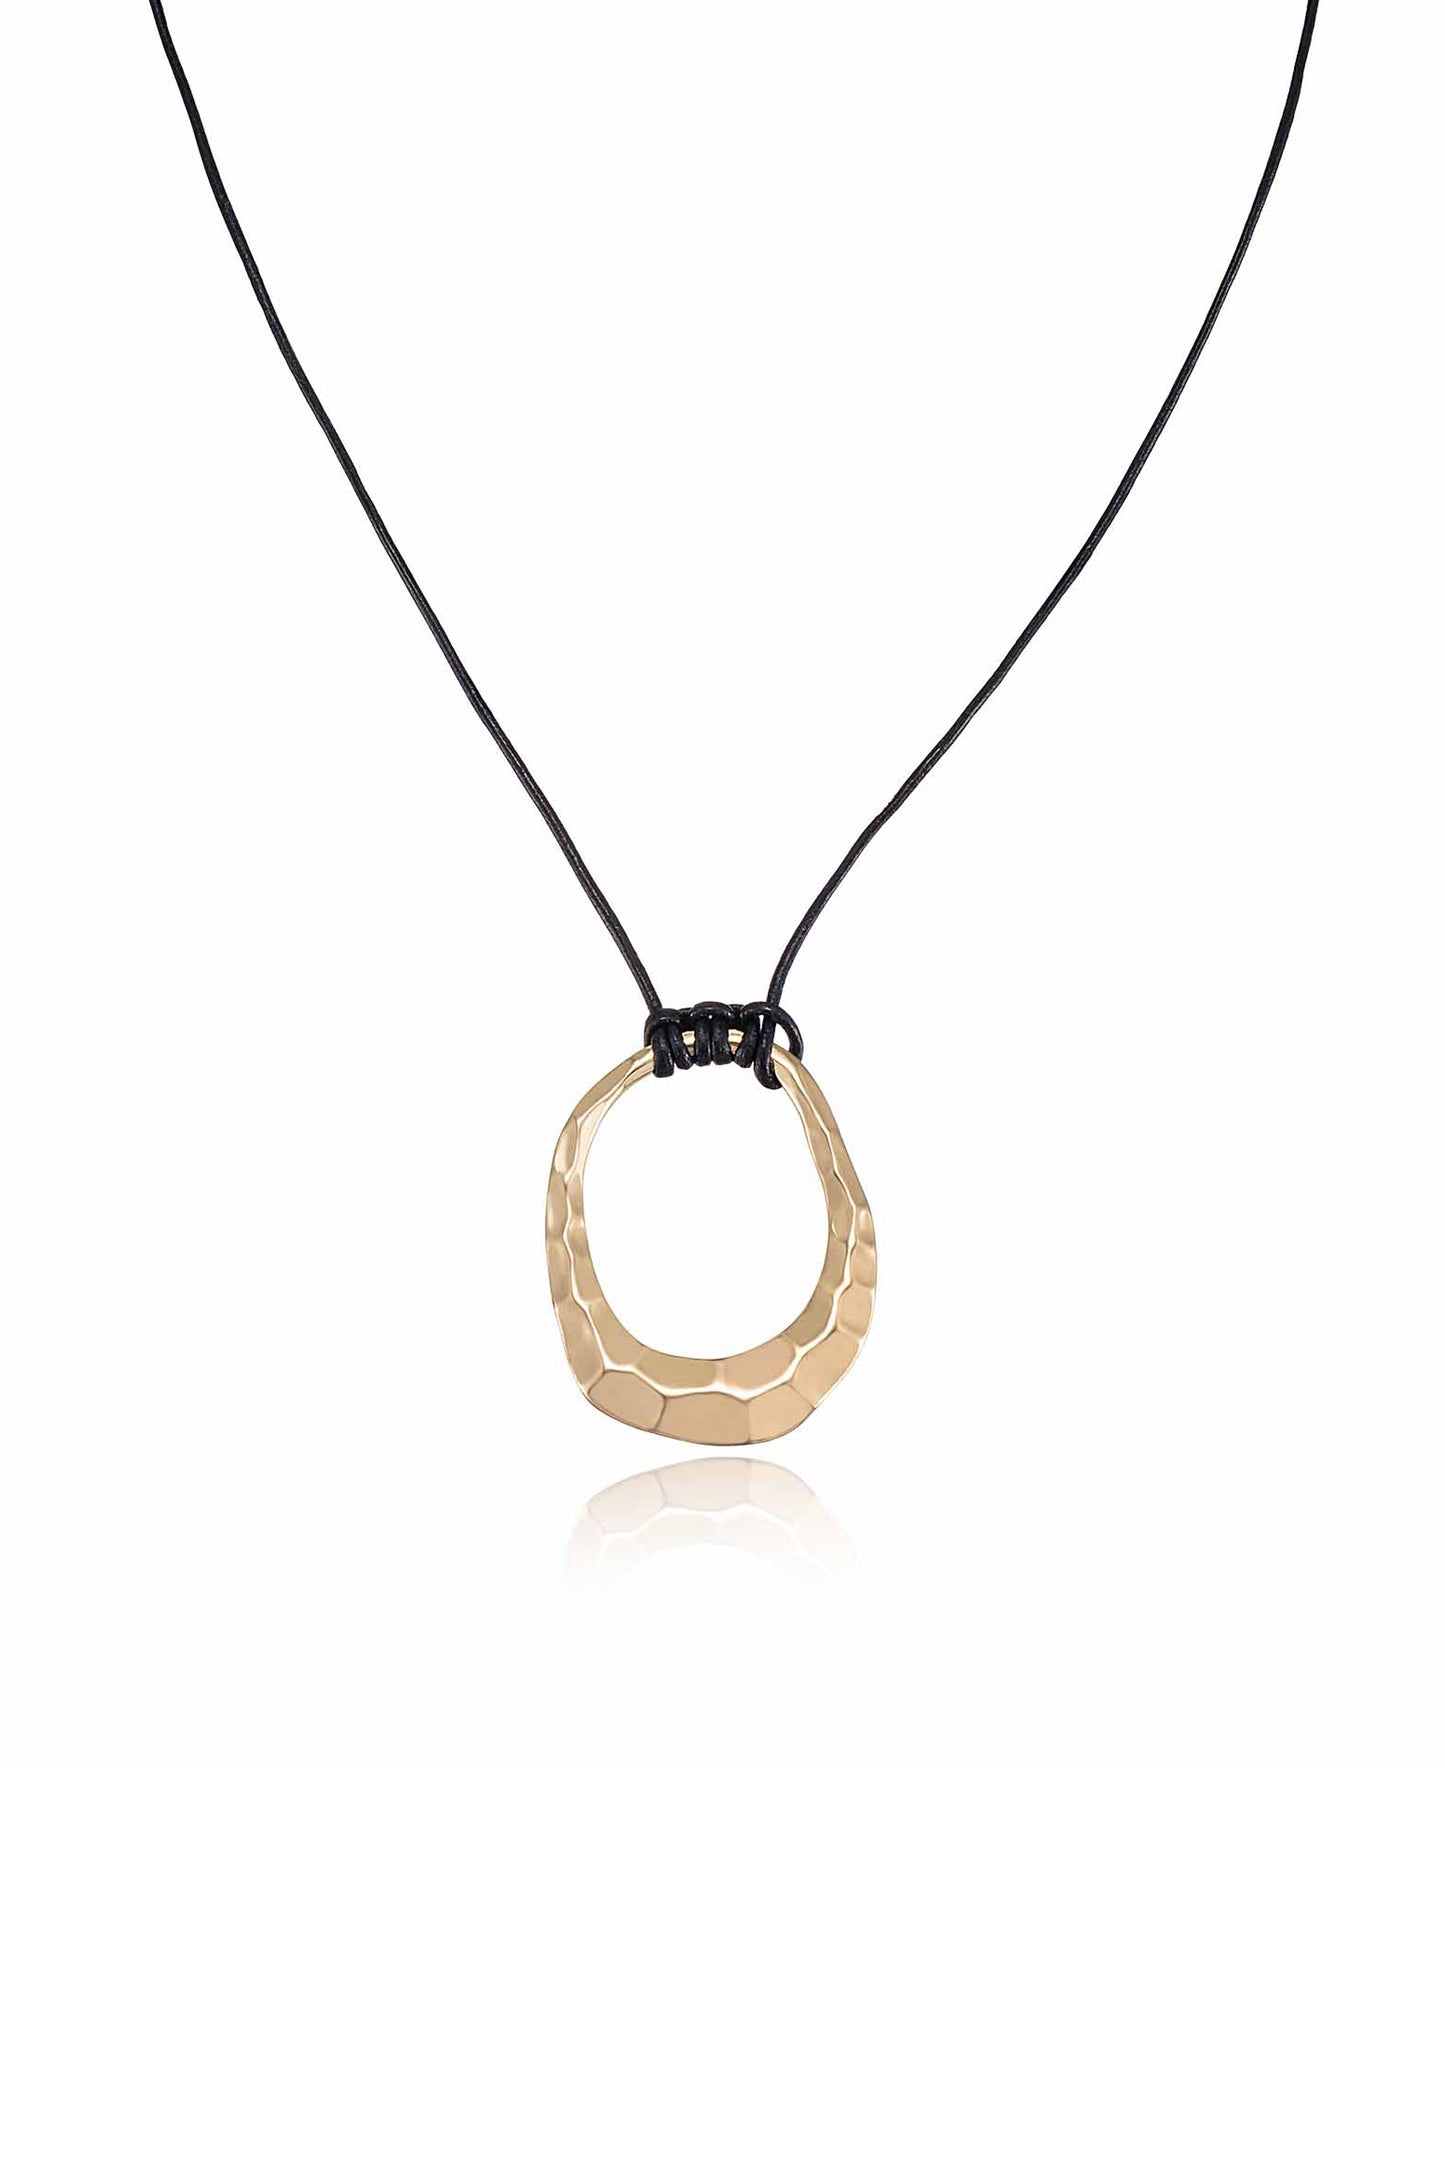 Hammered Golden Loop Pendant 18k Gold Plated Necklace close